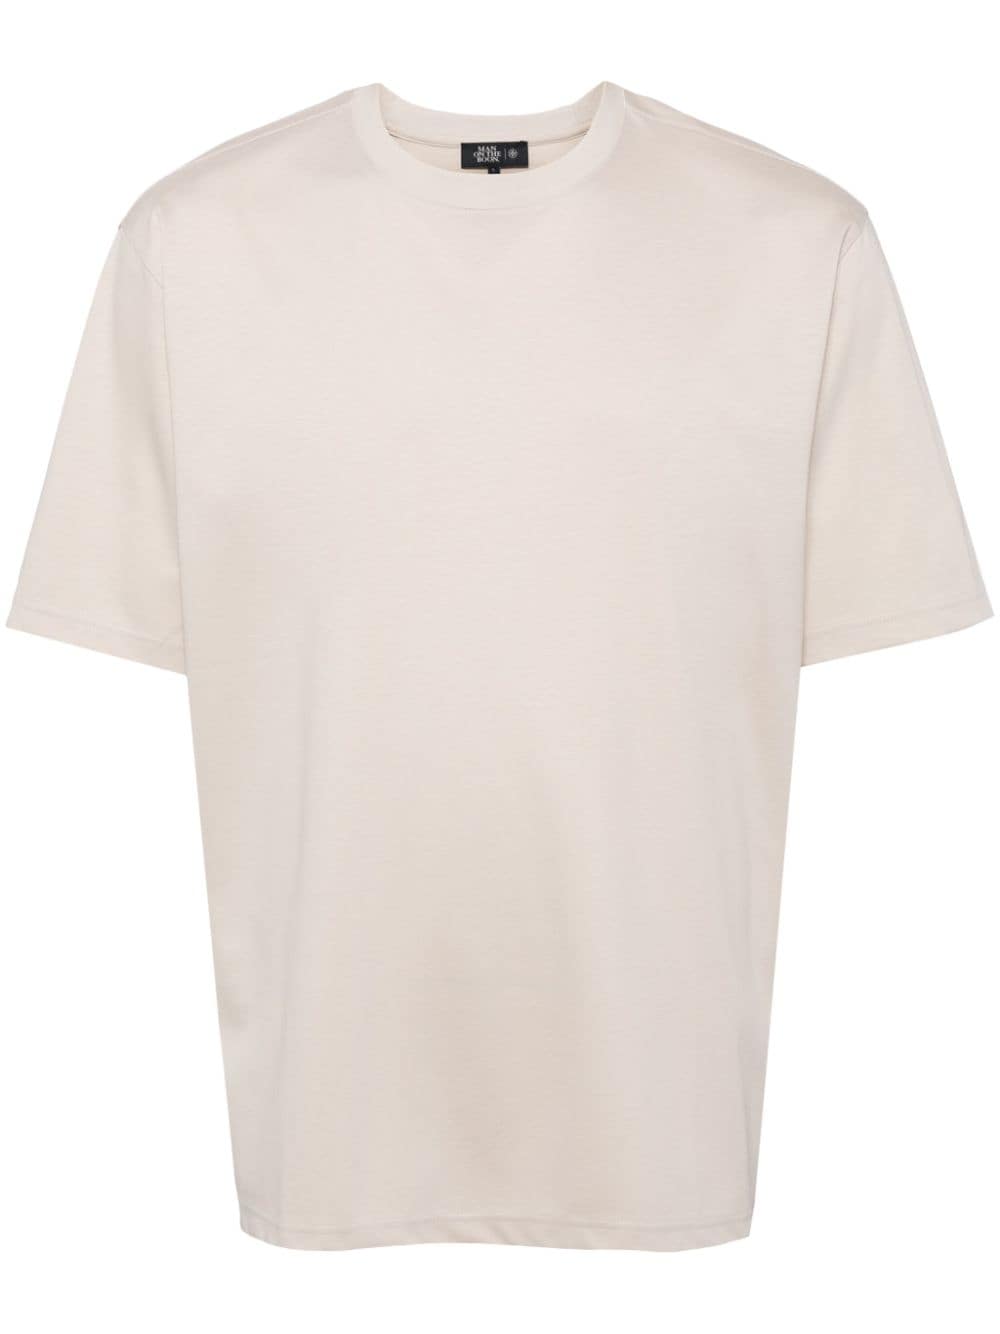 Man On The Boon. Glossy Crew-neck Cotton T-shirt In Neutral